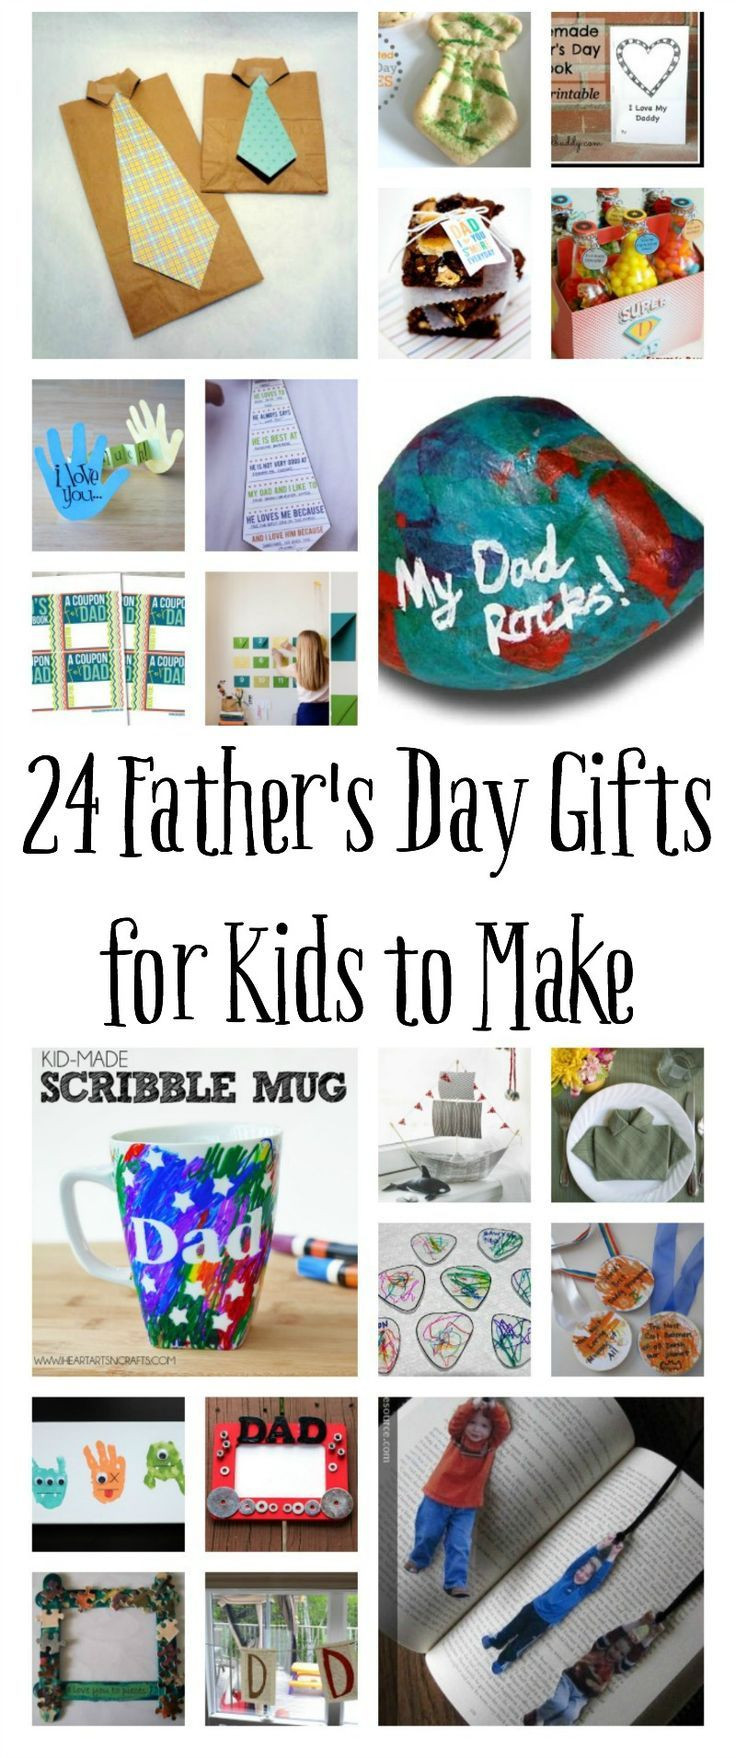 Mother's Day Gift Ideas For Kids
 Homemade Father s Day Gifts for Kids to Make